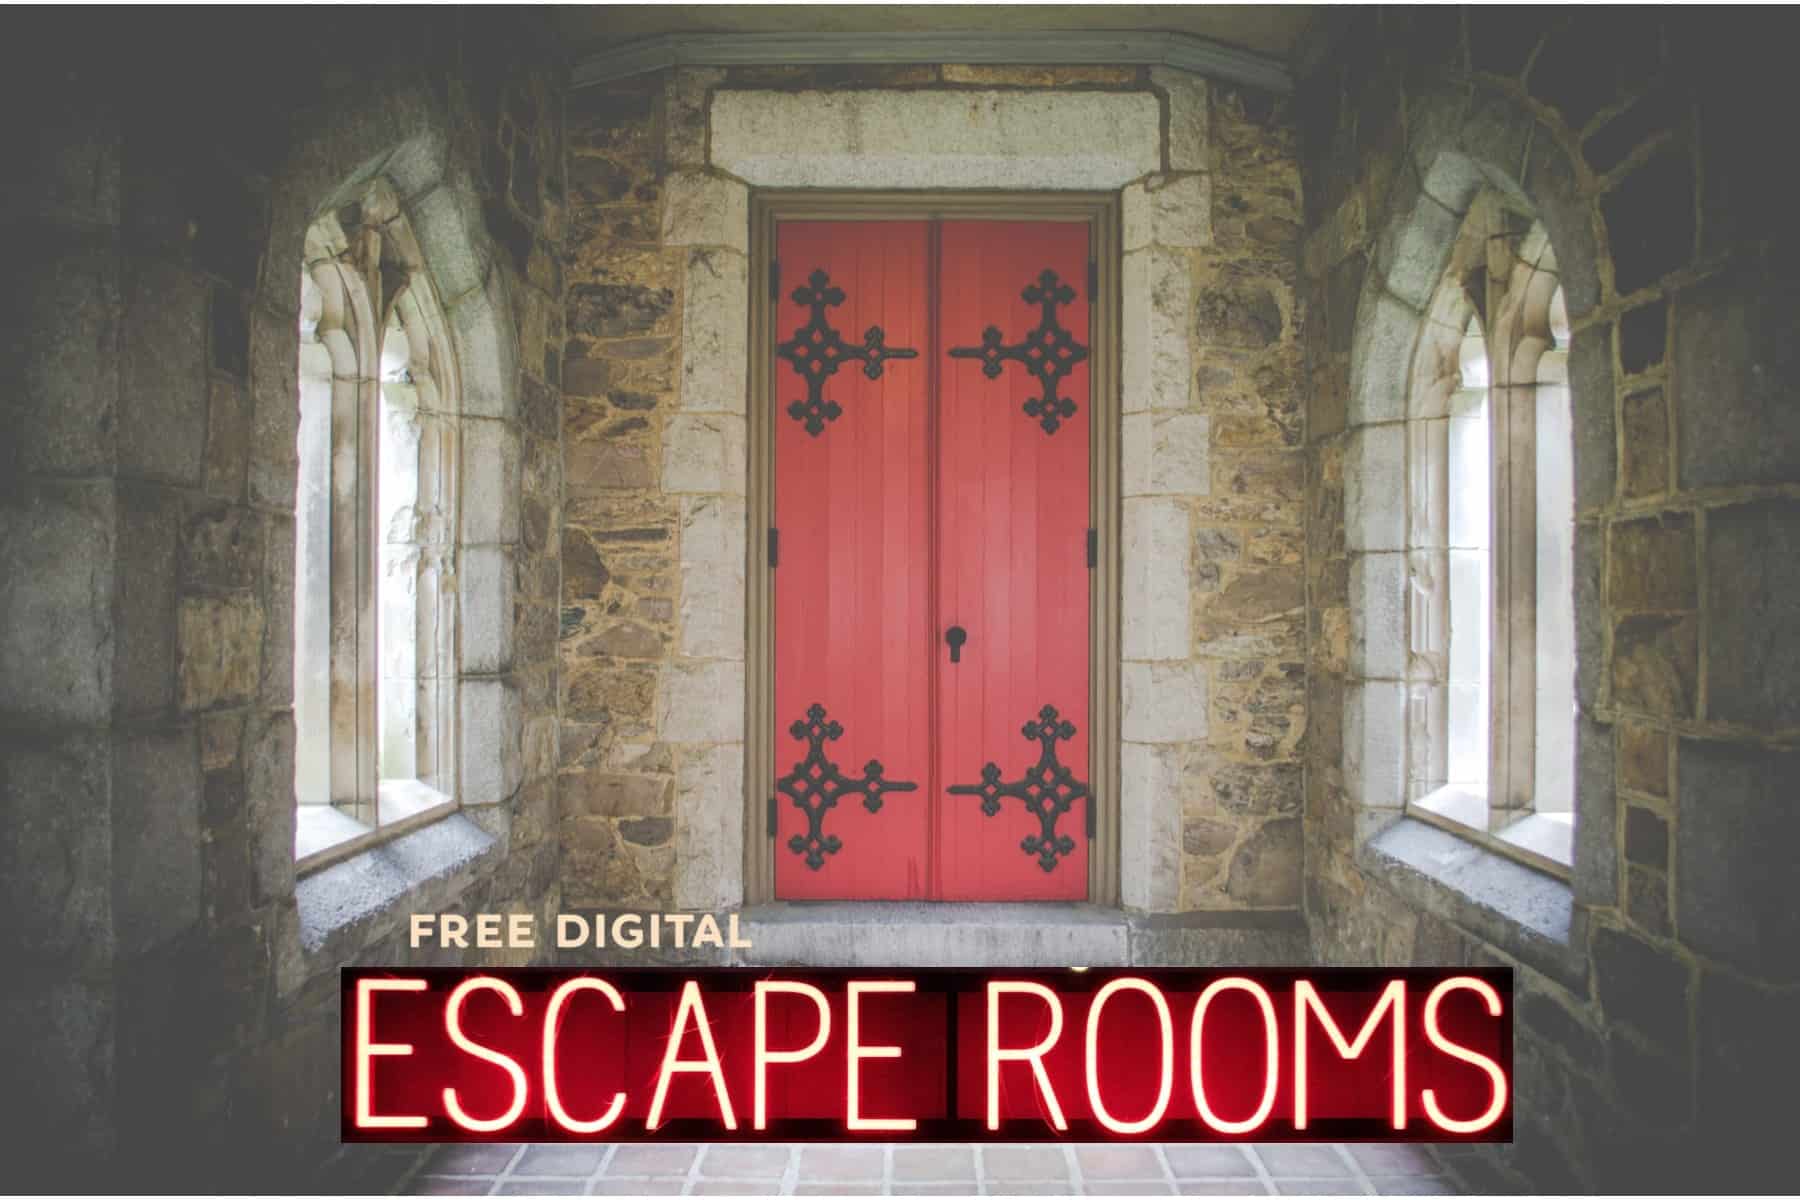 ESCAPE GAMES 🚪 - Play Online Games!